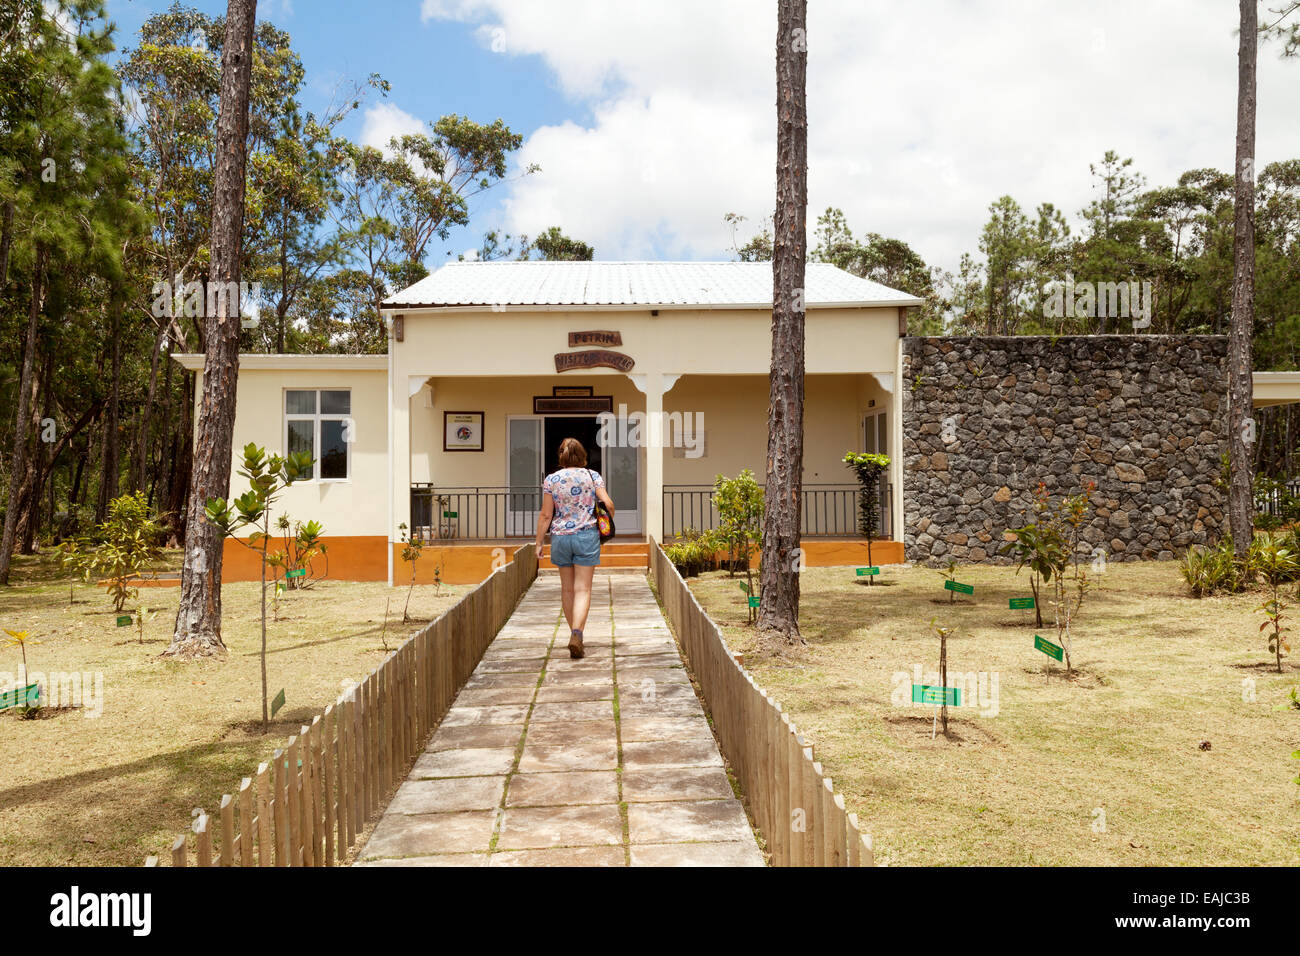 A tourist at the visitor centre, Petrin, Black River Gorges, National Park, Mauritius Stock Photo